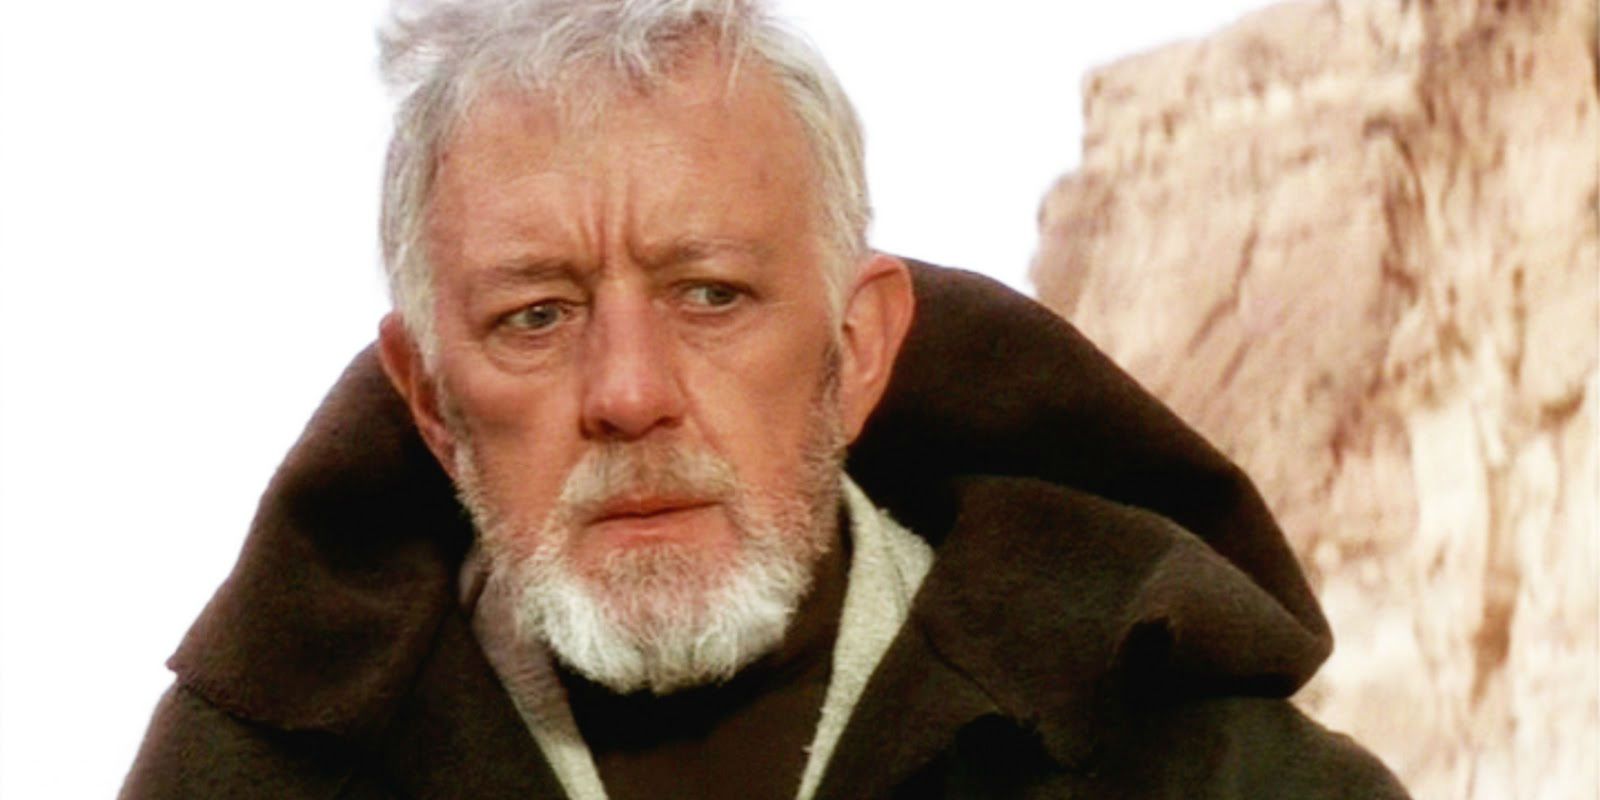 Star Wars Theory: Obi-Wan Used A Dark Side Trick To Hide From Vader